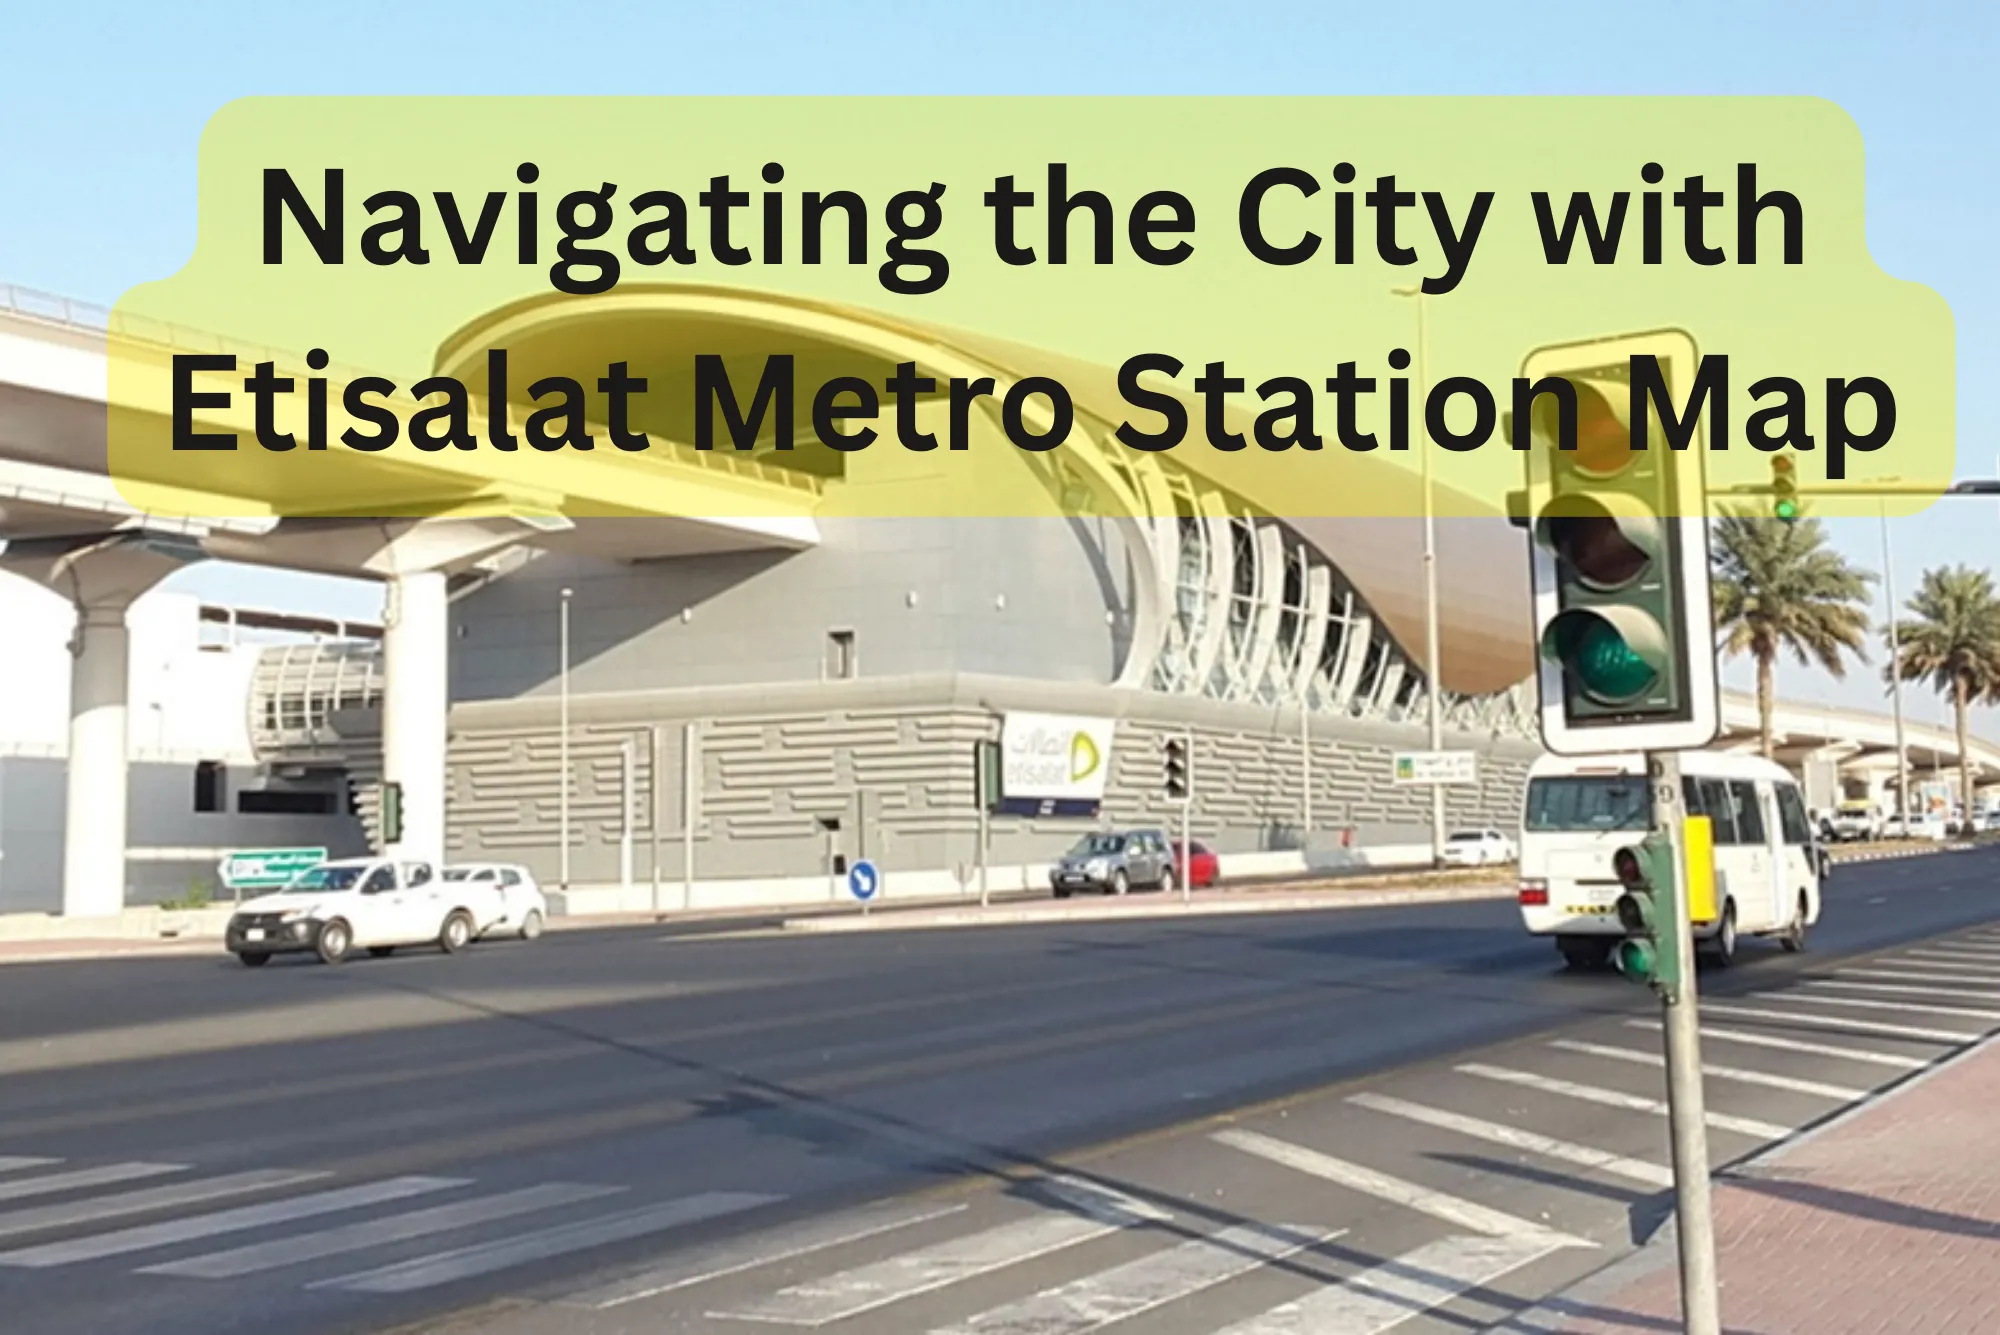 Navigating the City with Etisalat Metro Station Map